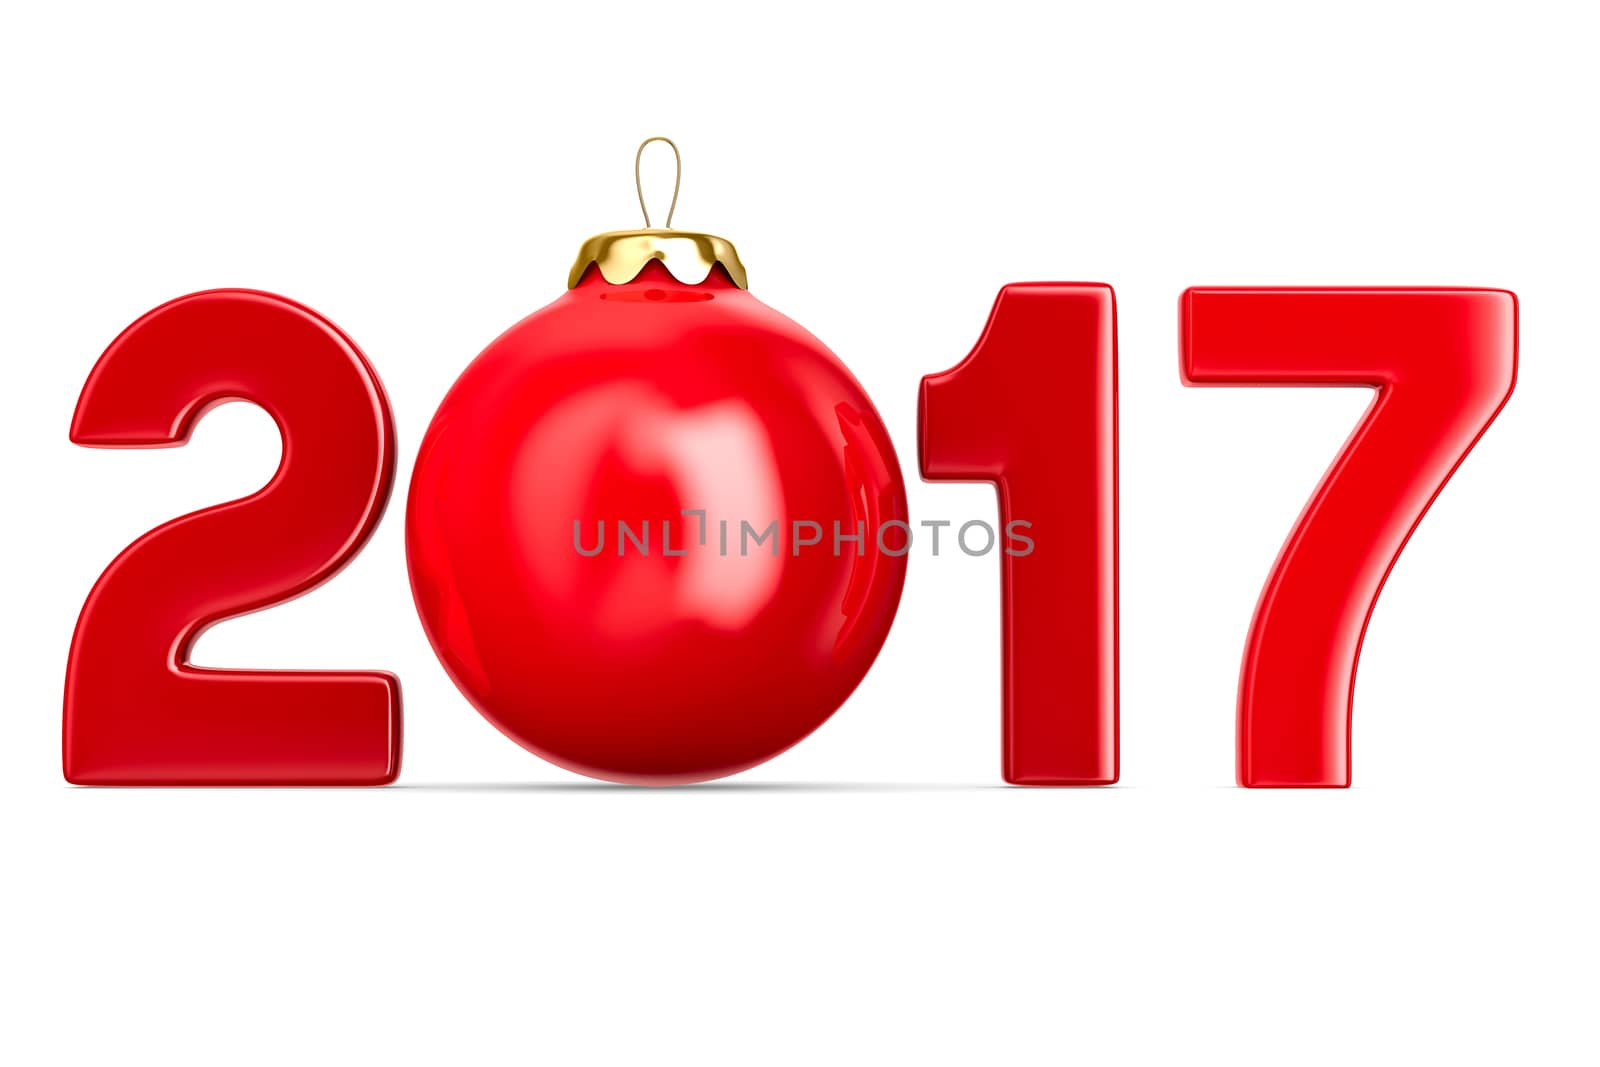 2017 new year. Isolated 3D image by ISerg